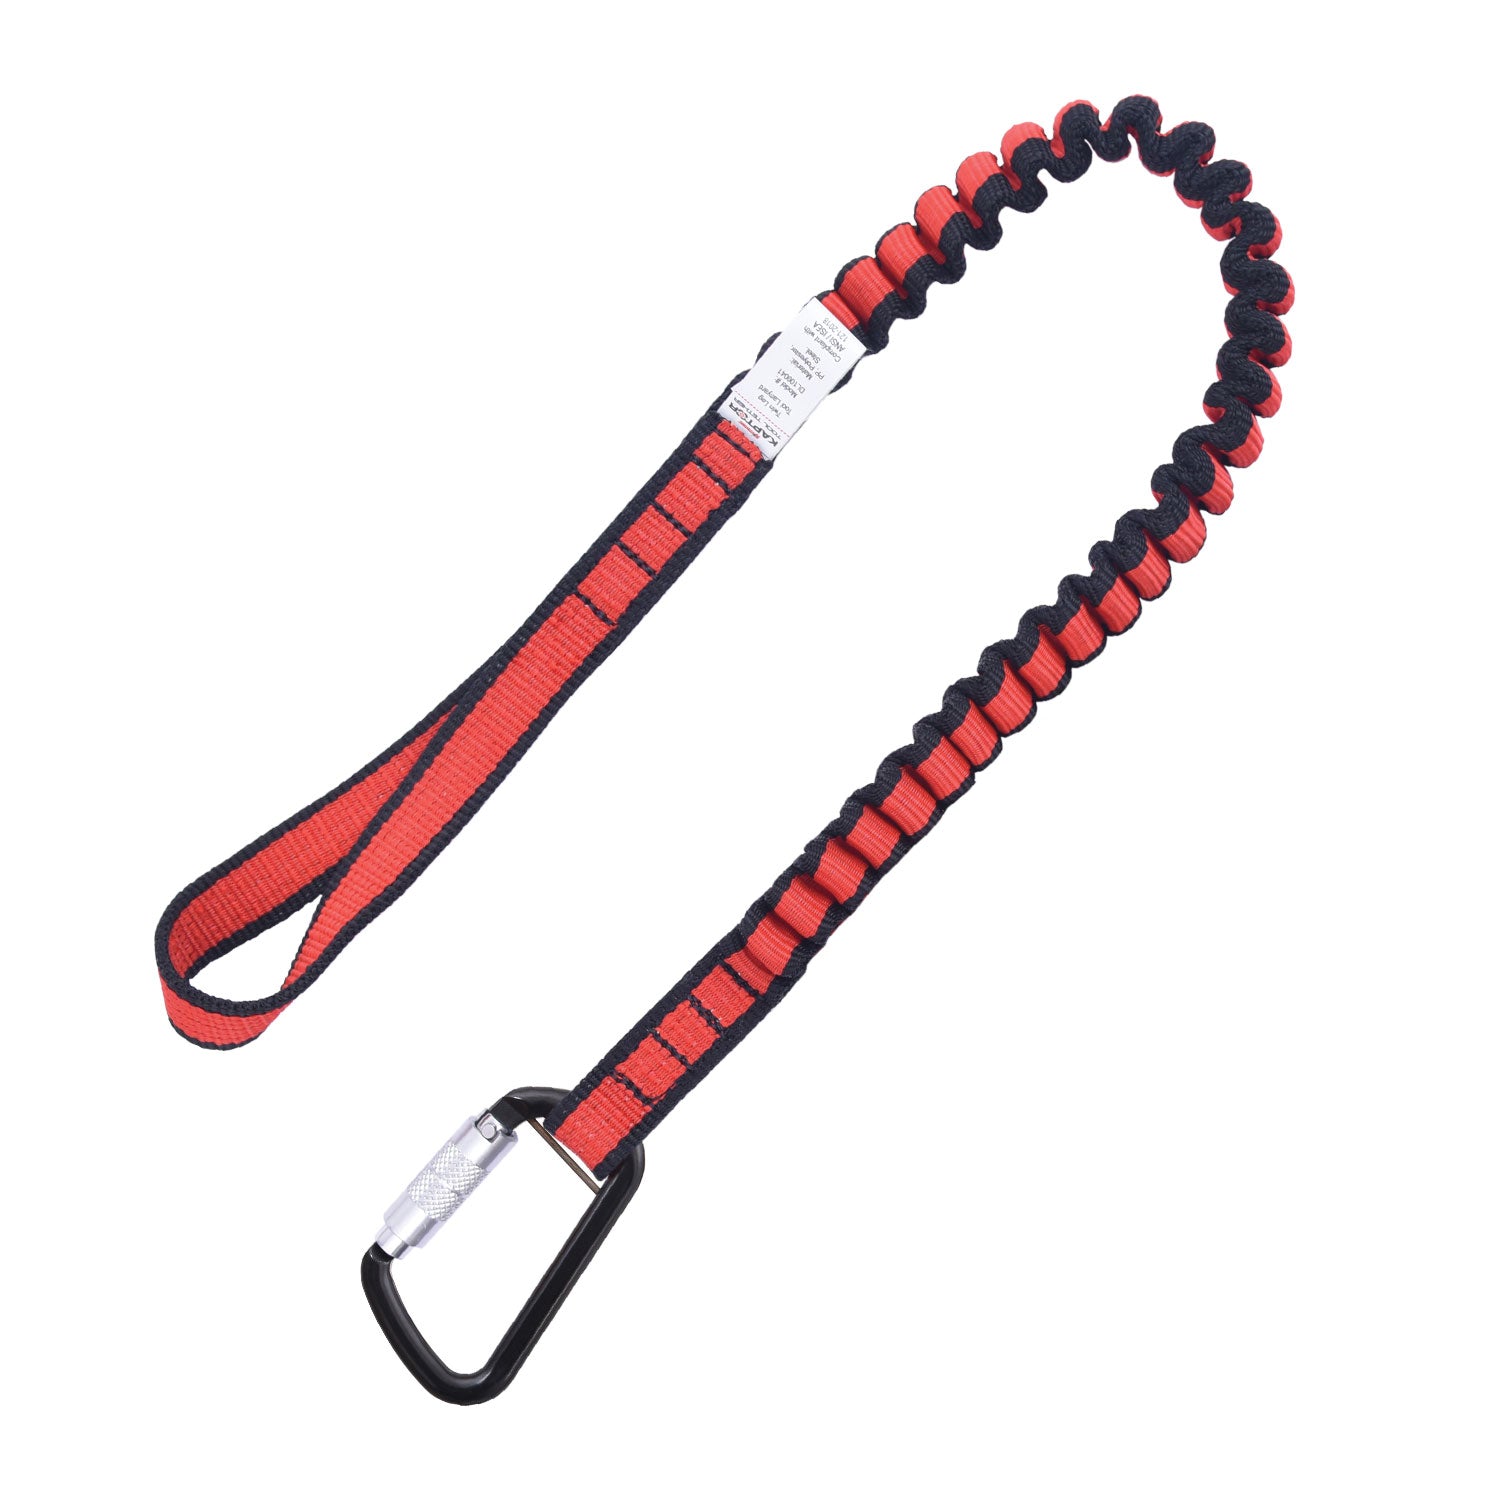 KStrong Kaptor™ Single Leg Tool Lanyard with Webbing Loop at Tool End and Connector at Other End – 22 lbs. (each)